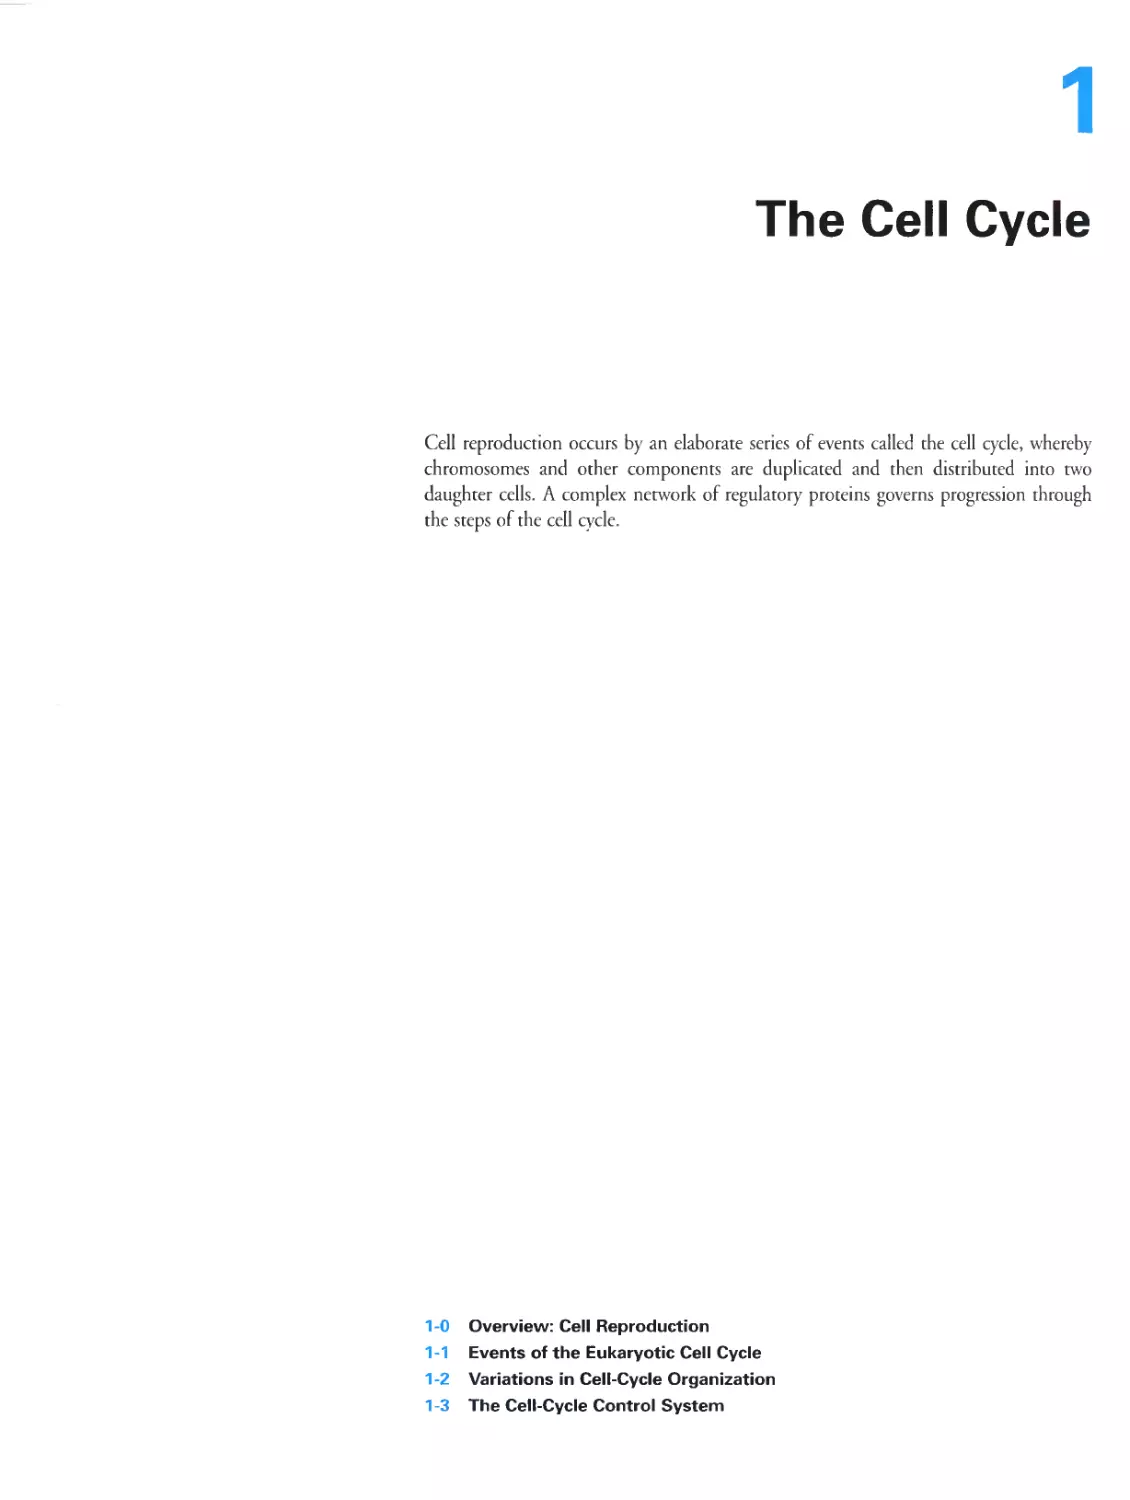 Chapter 1. The Cell Cycle